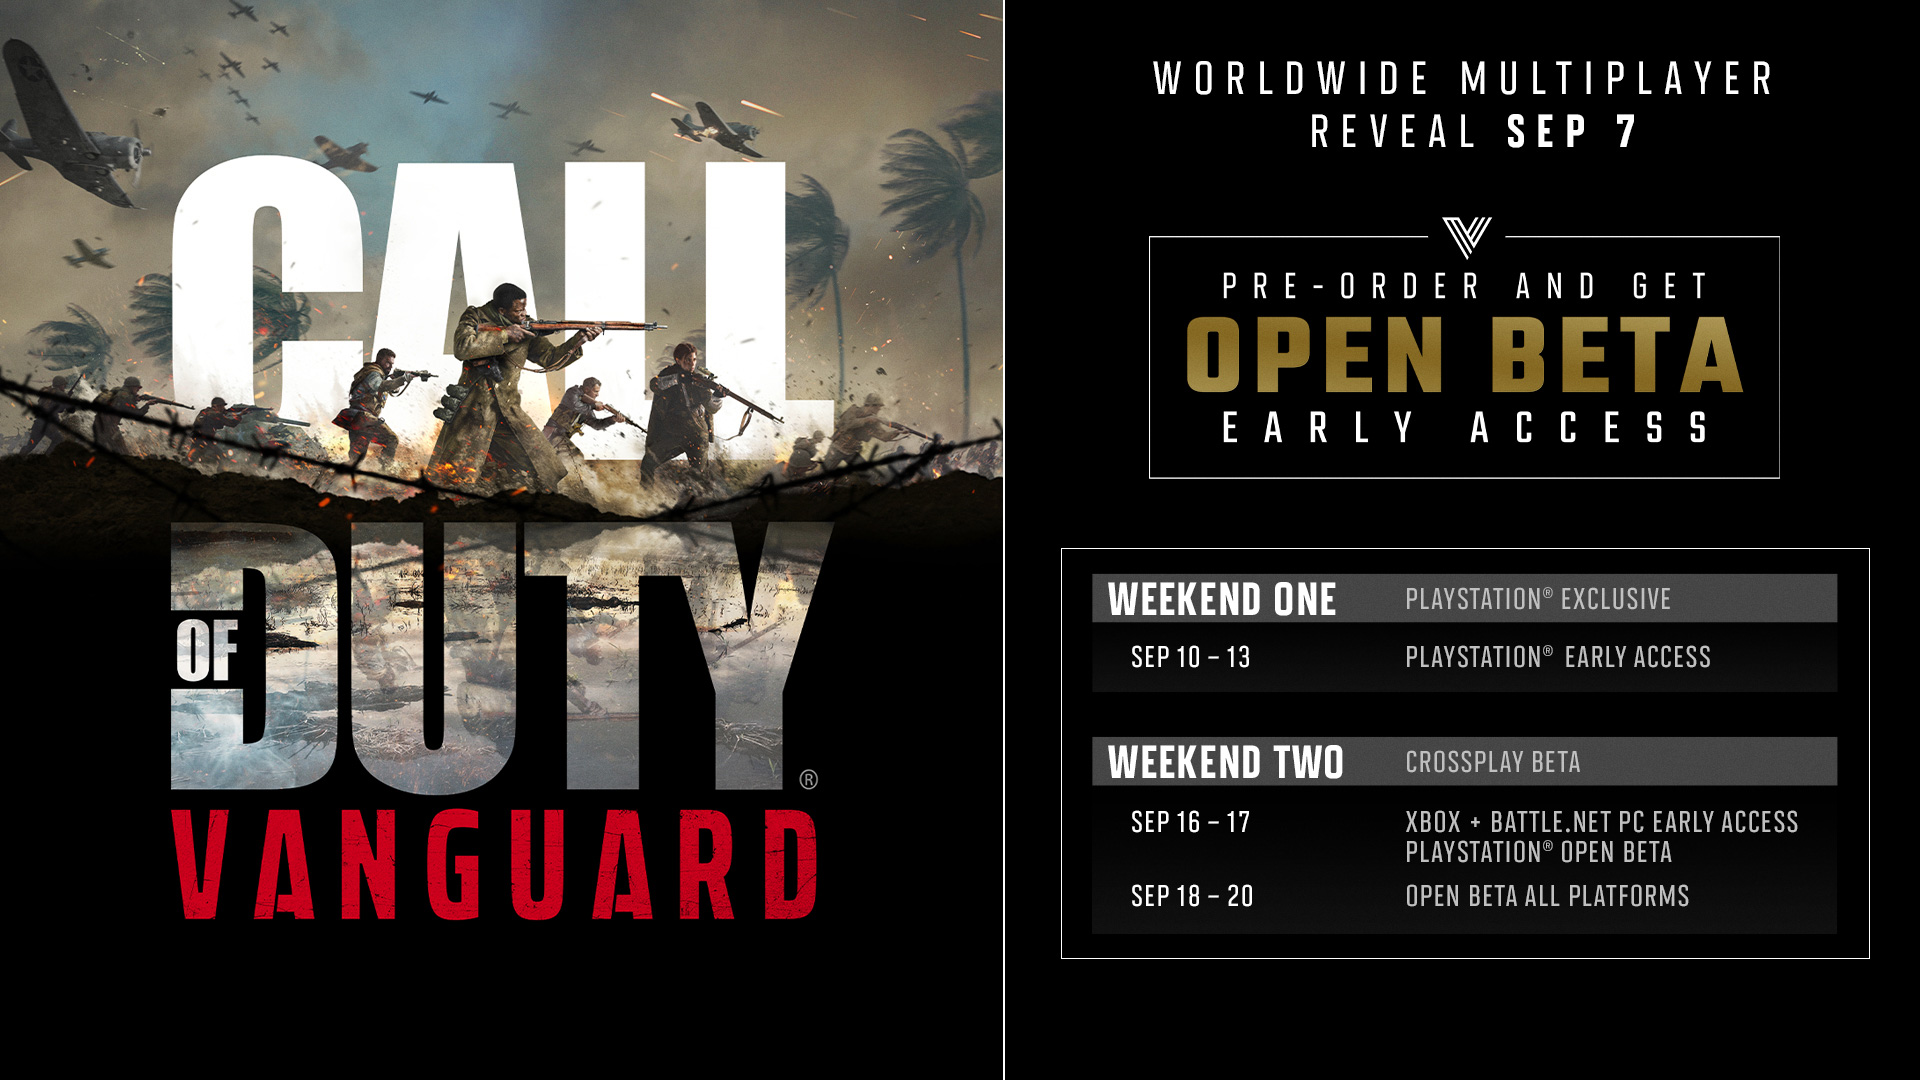 CharlieIntel on X: Call of Duty: Vanguard Beta Info: • PlayStation® only  (pre-order required): Sept. 10 - 13 • PlayStation® Open Beta: Sept. 16 - 20  • Xbox & PC (pre-order required)